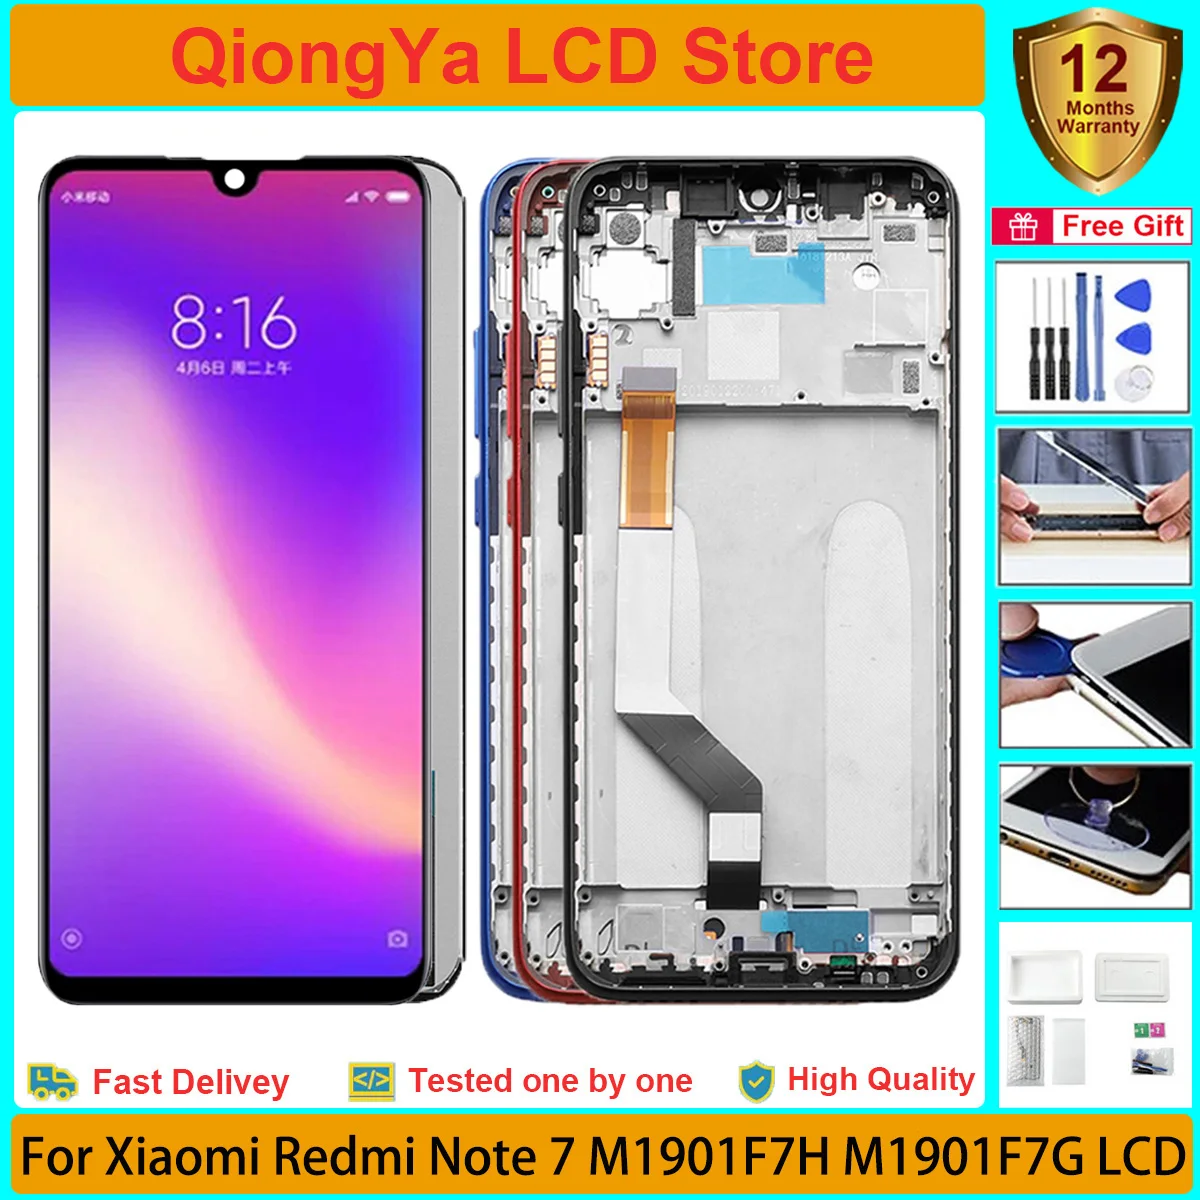 

New Original 6.3"Display For Xiaomi Redmi Note 7 M1901F7H M1901F7G / Note 7 Pro M1901F7S LCD and Touch Screen Digitizer Assembly